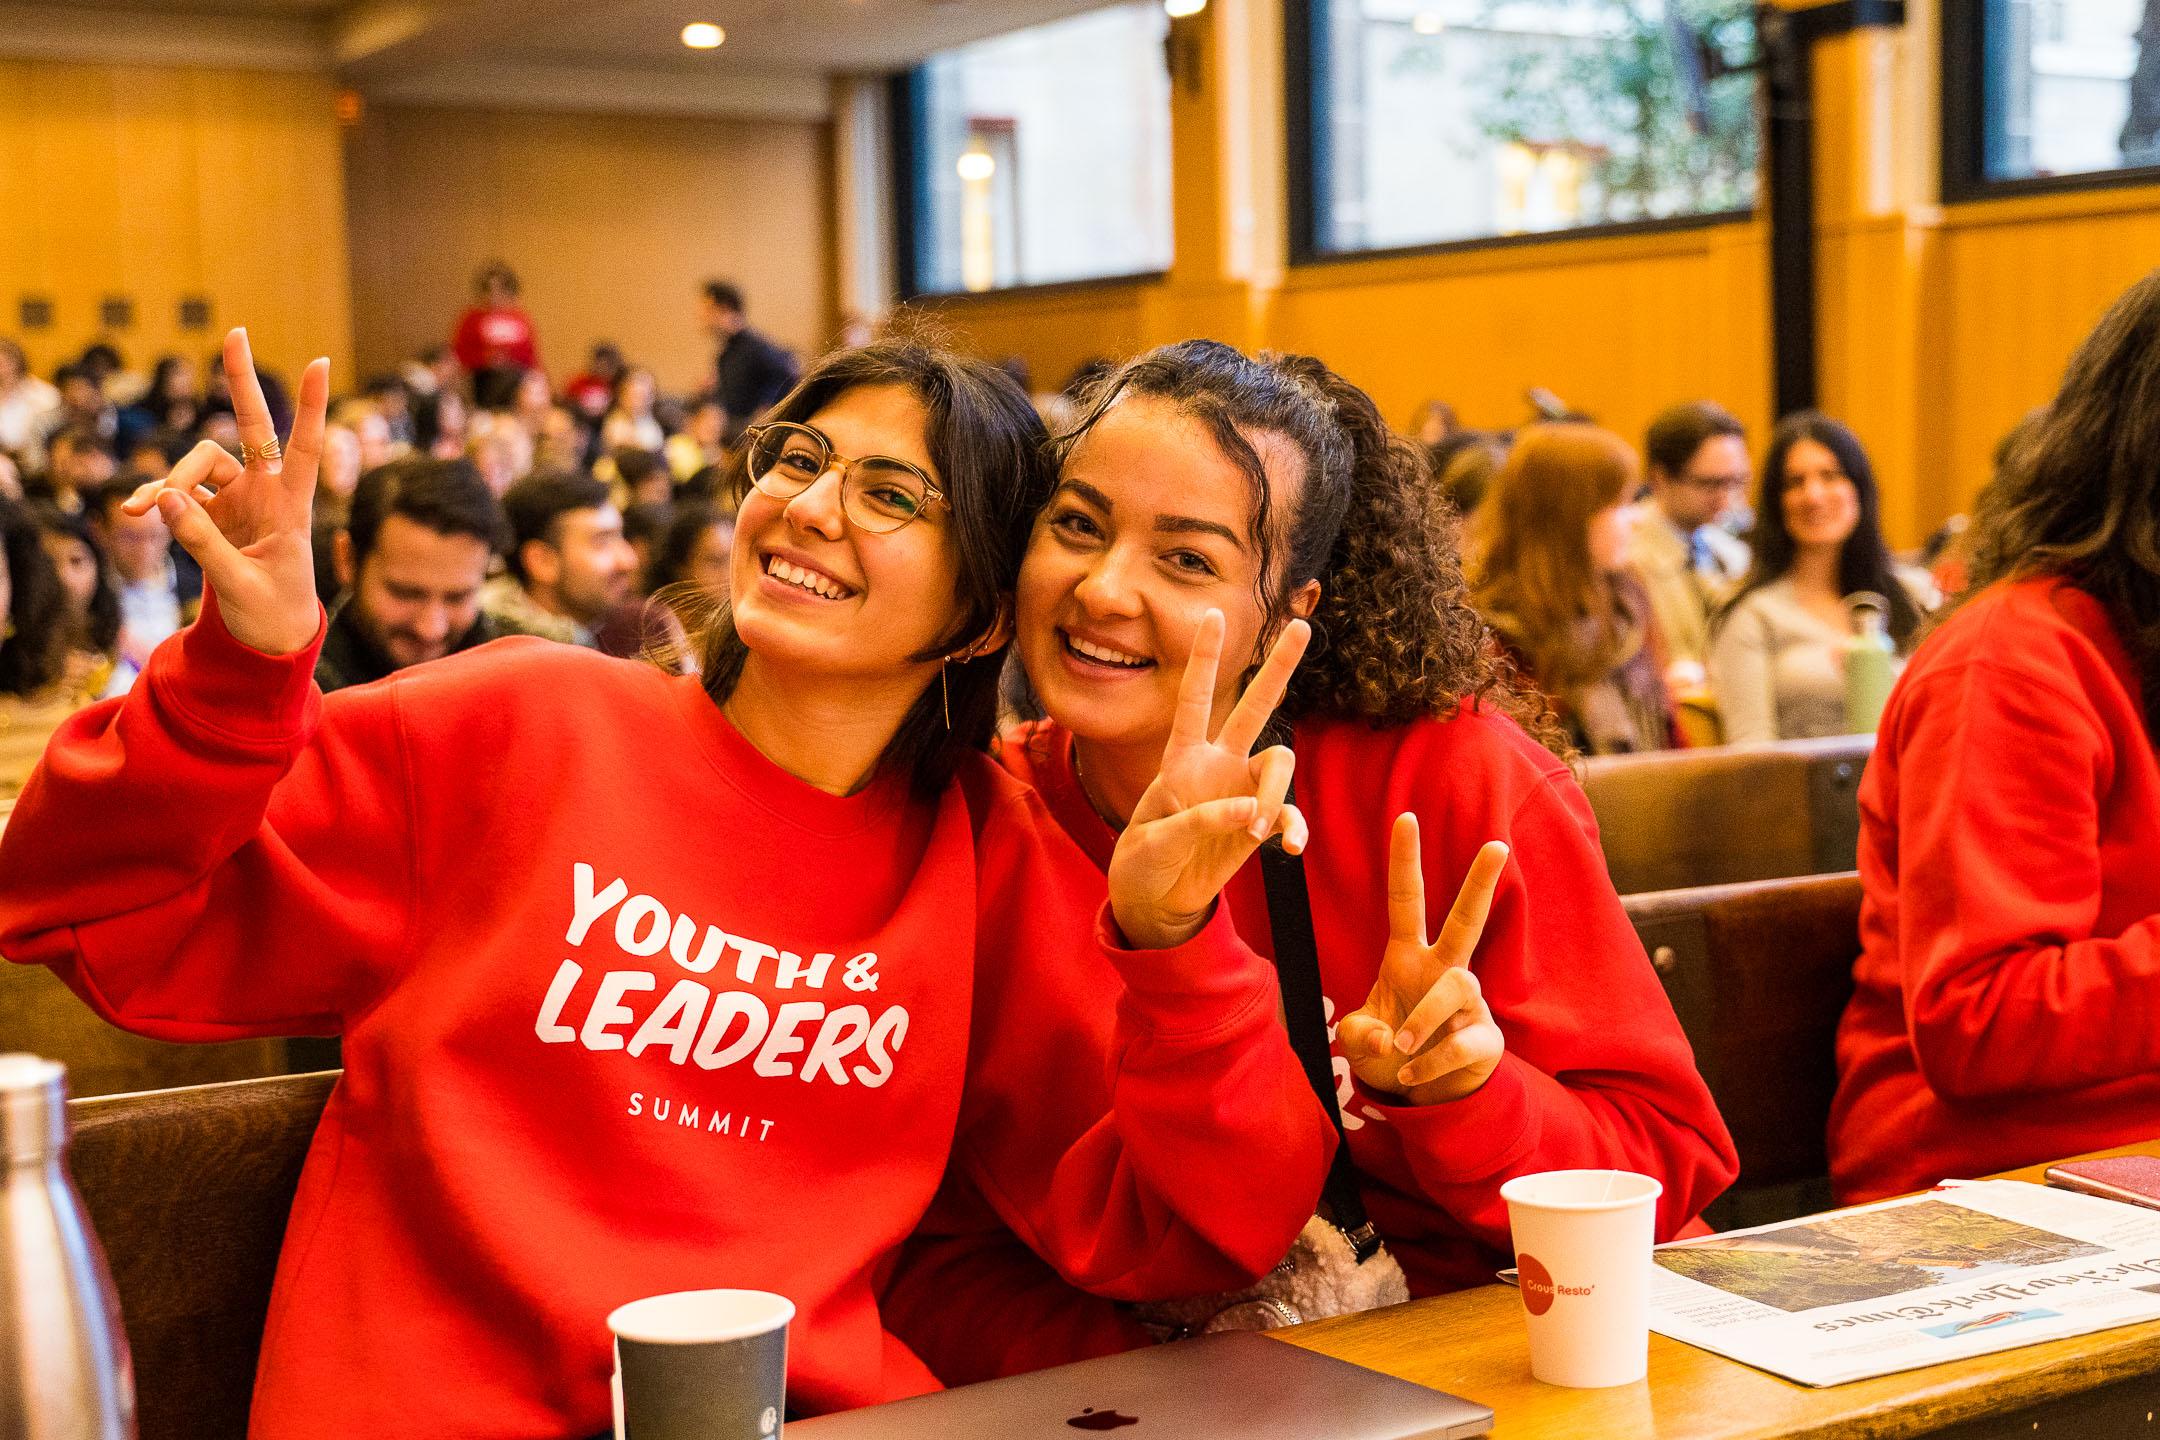 Sciences Po: Youth Leader Summit France